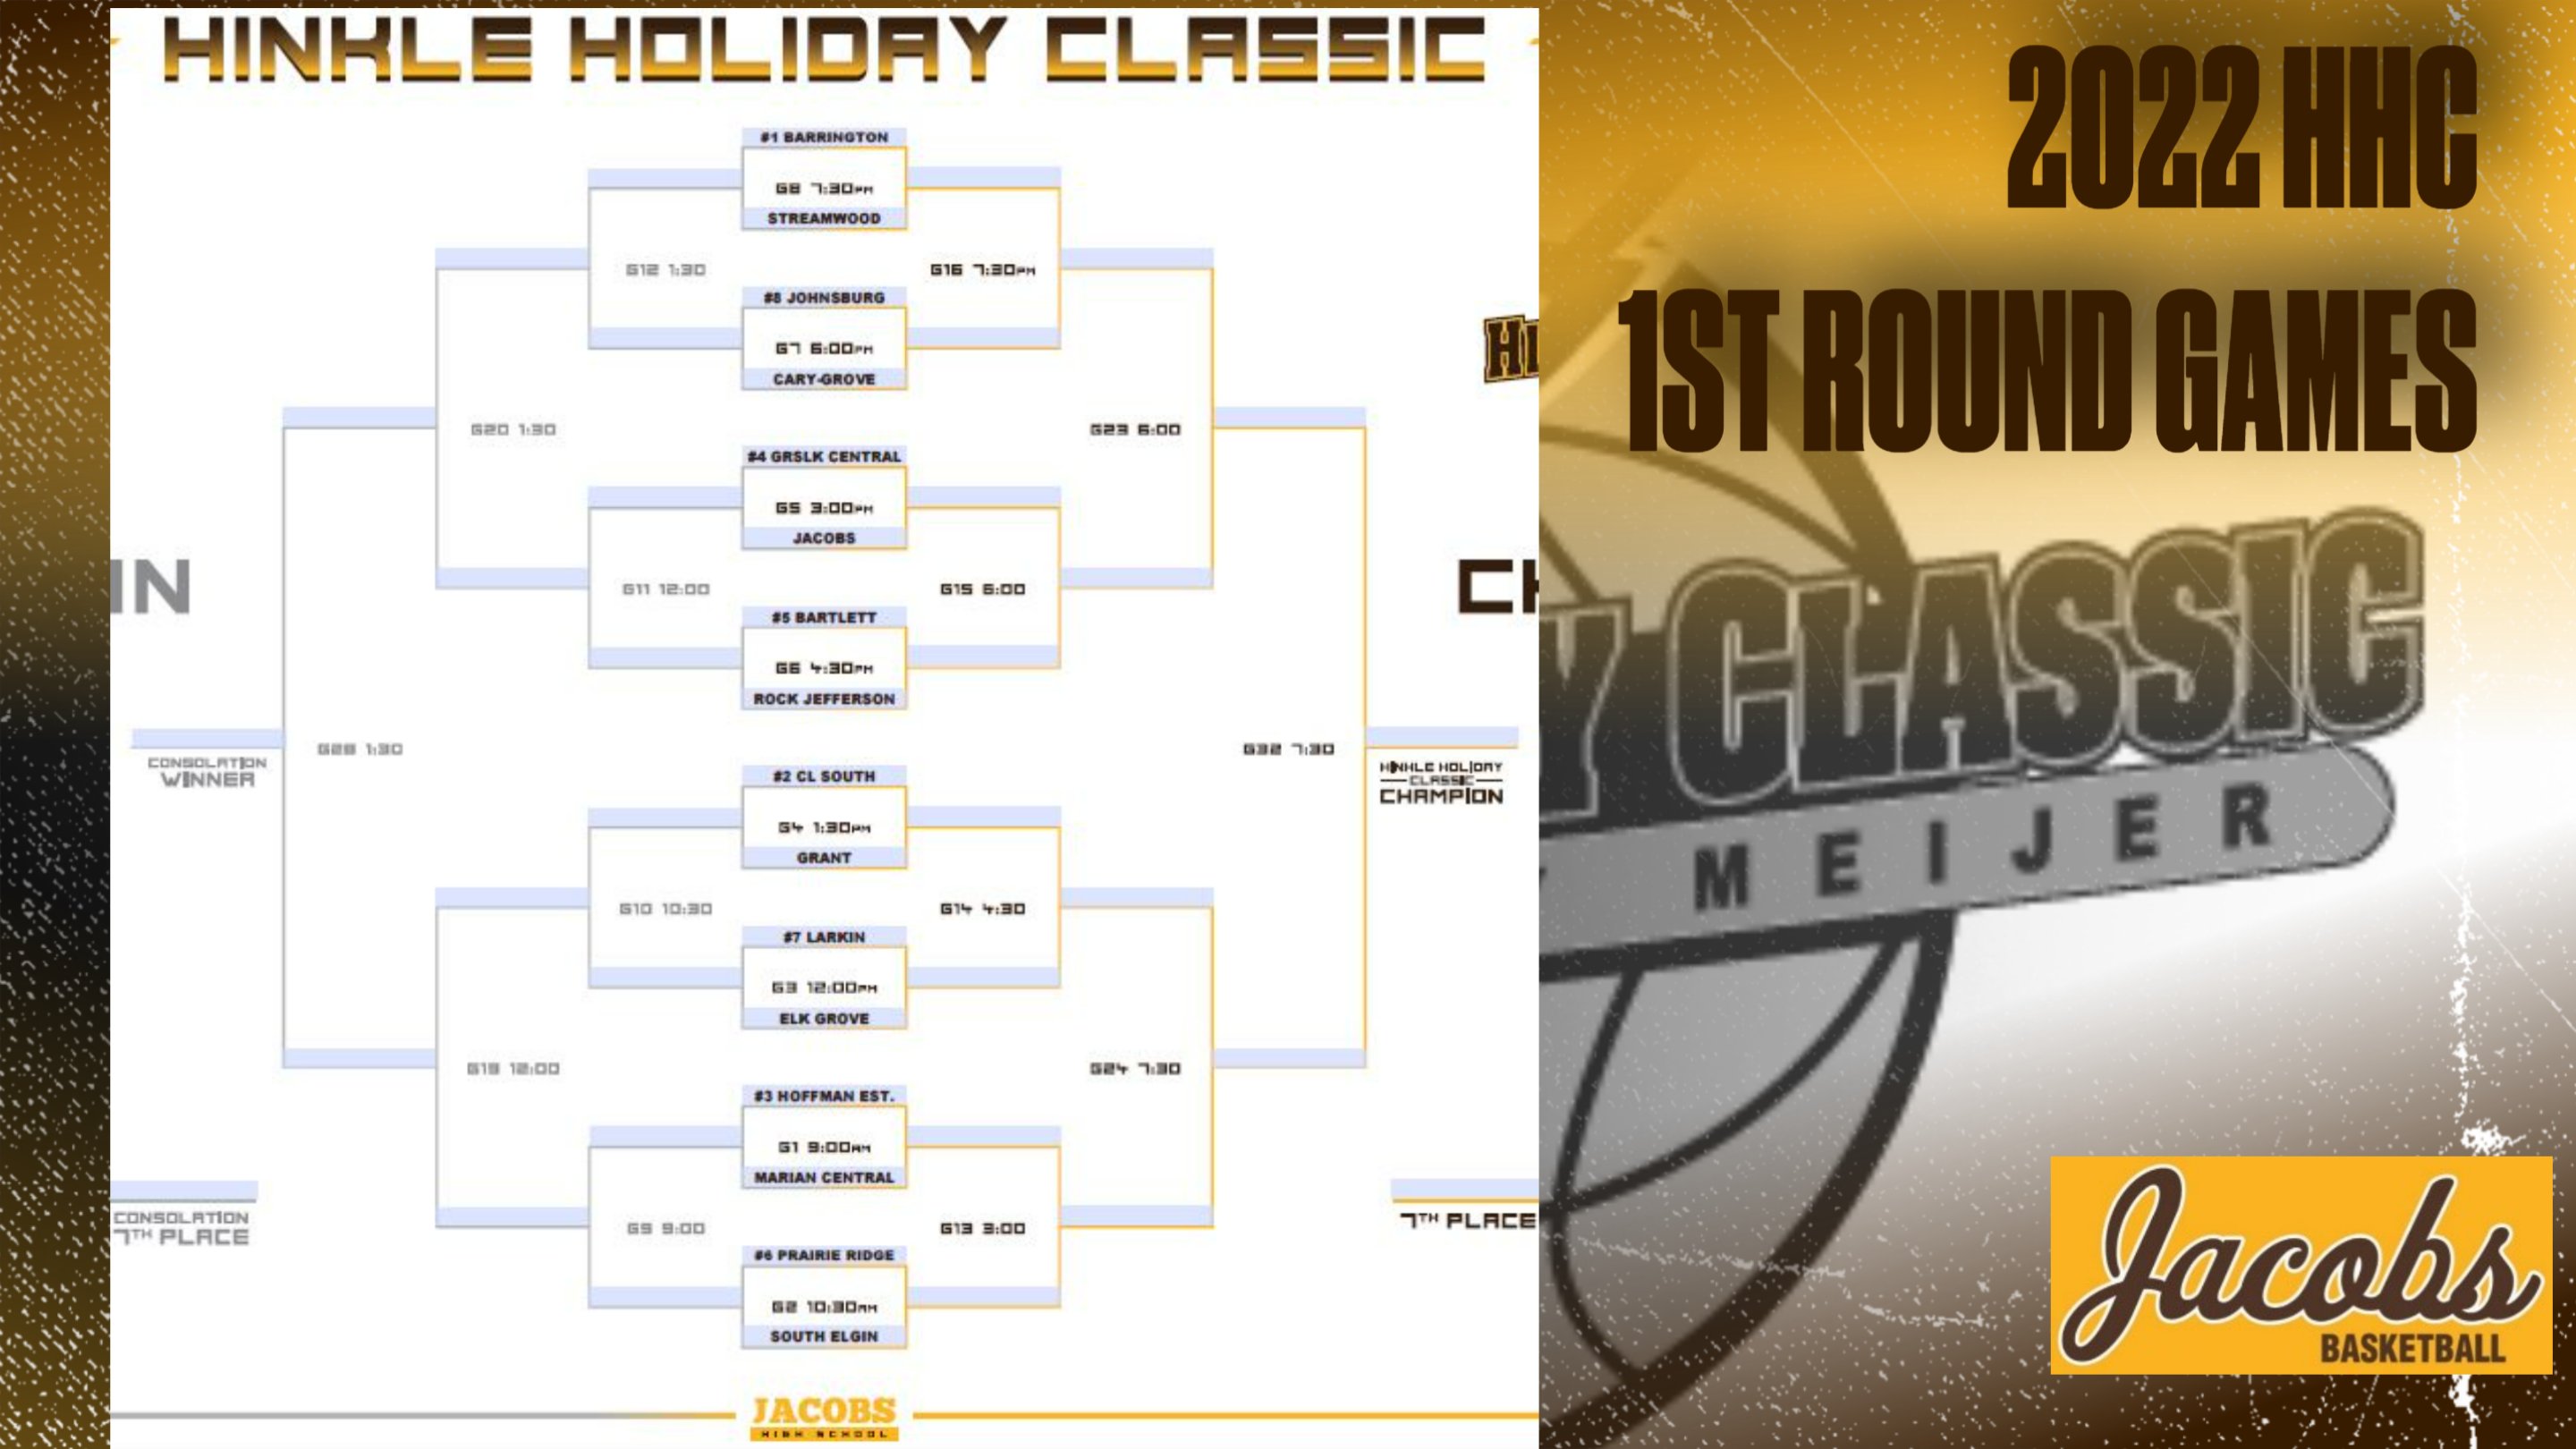 Hinkle Holiday Classic Jacobs High School on Twitter "The 1st round